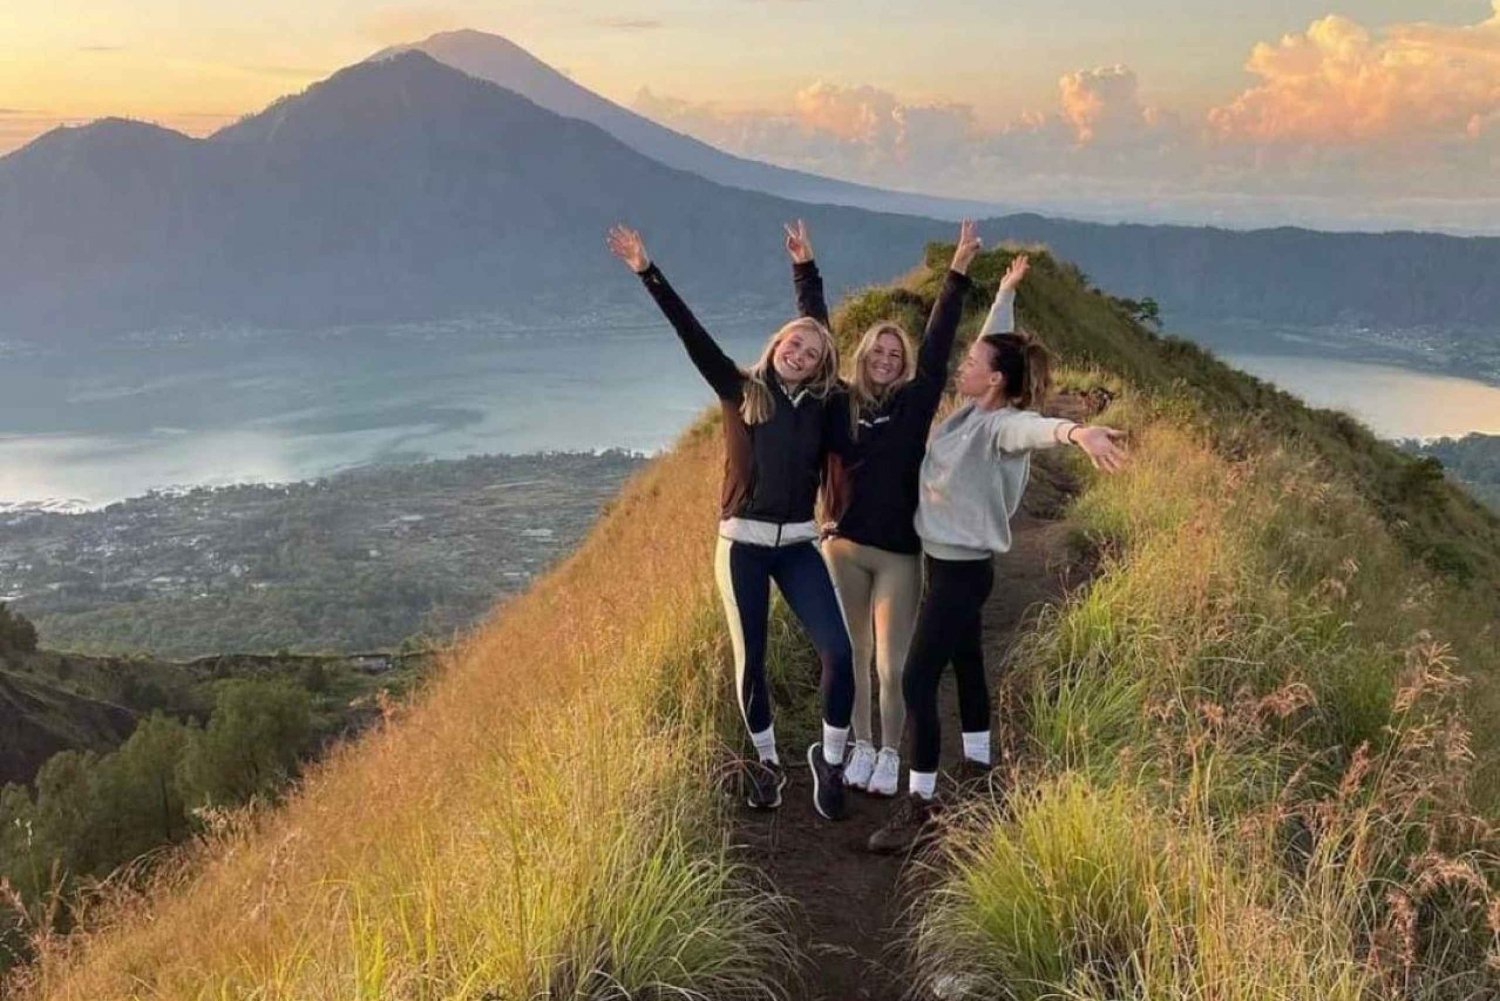 From Ubud: Mount Batur Sunrise Hike with Local Guide